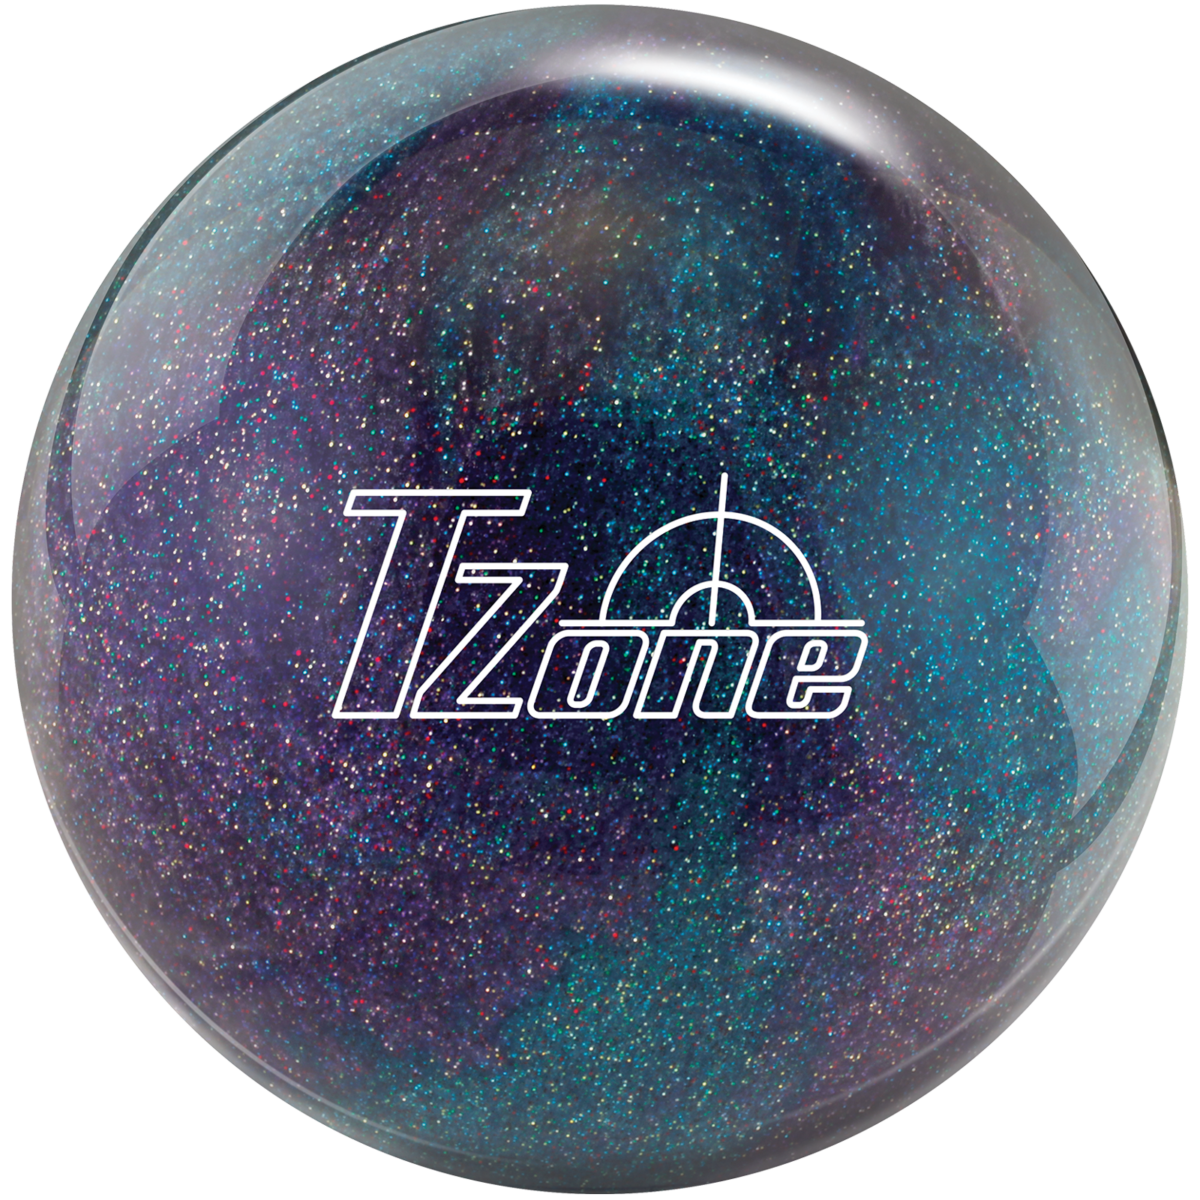 Tzone bowling ball ,bowling shoes and bag and like new black